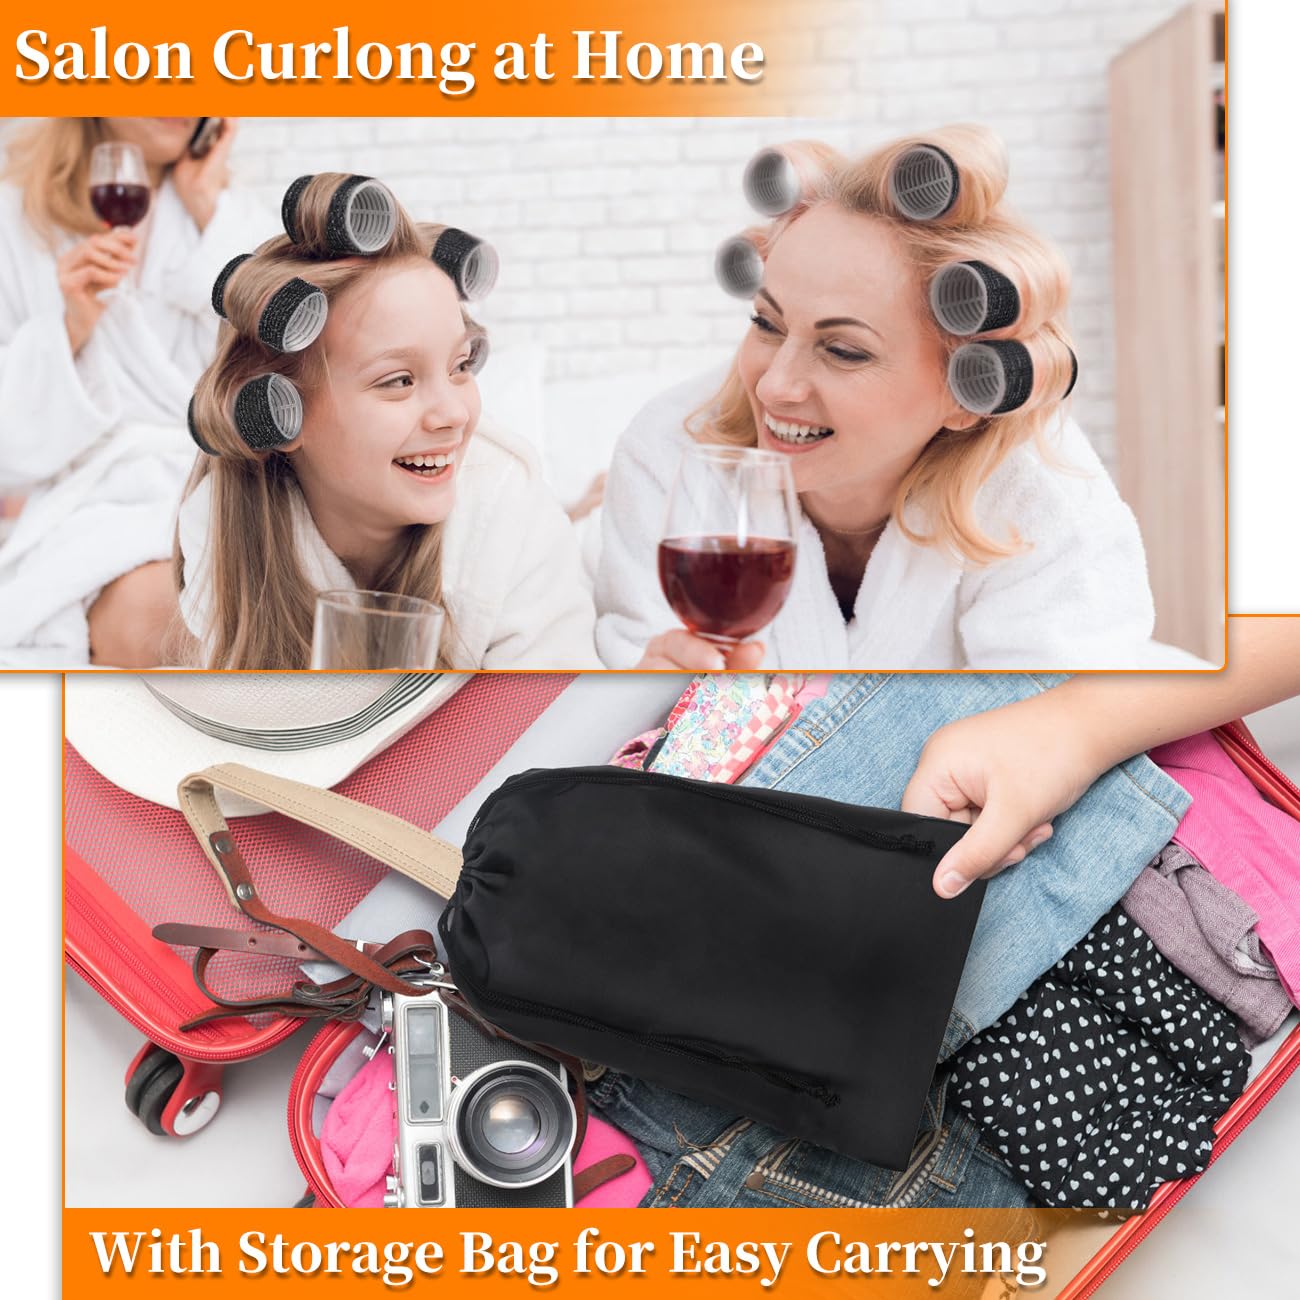 38PCS Hair Rollers Hair Curlers, Rollers, Curlers for Long Hair Thick, Jumbo Large Medium Small Rollers Set, 12 Stainless Steel Clips and Storage Bag